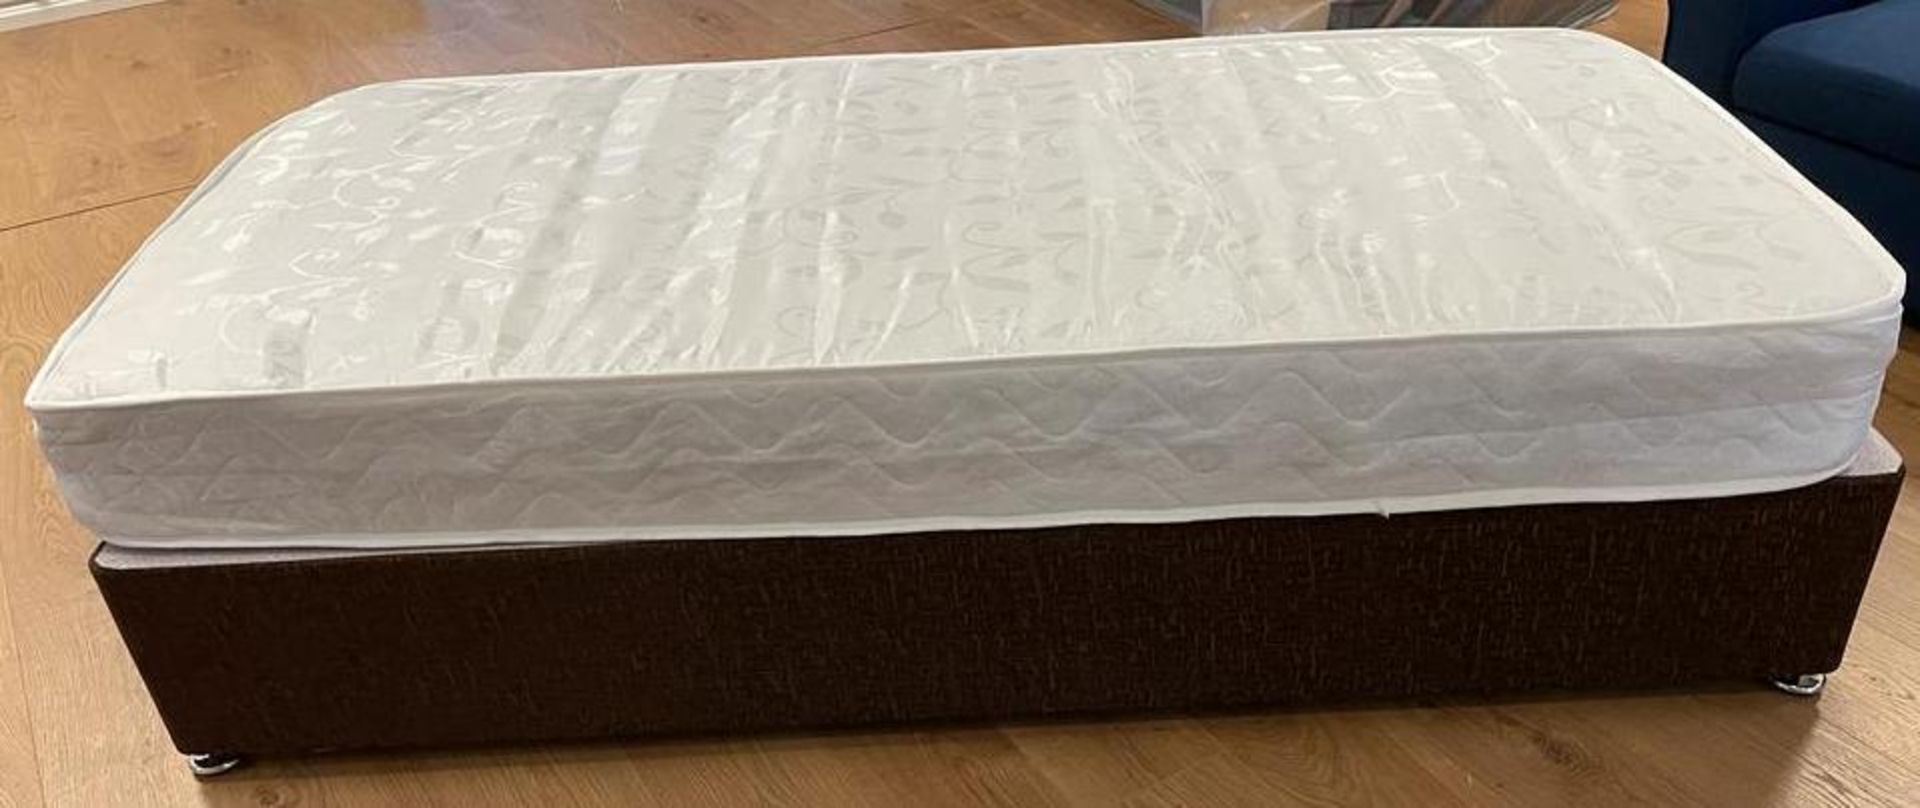 Brand New 3ft bed base in a light brown chenille with 800 pocket sprung Mattress.